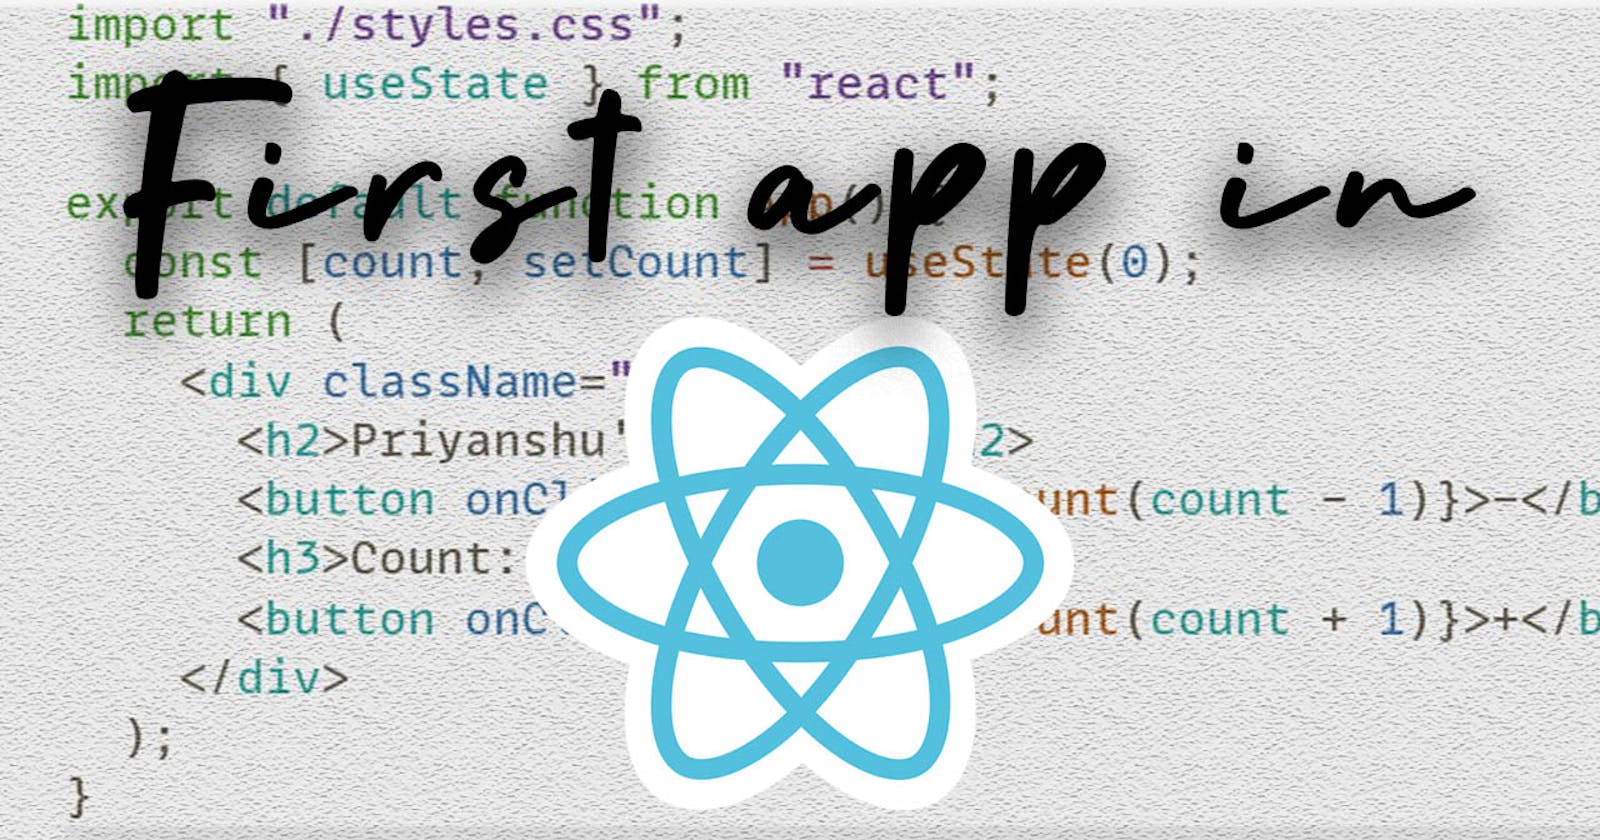 How to get started with React?